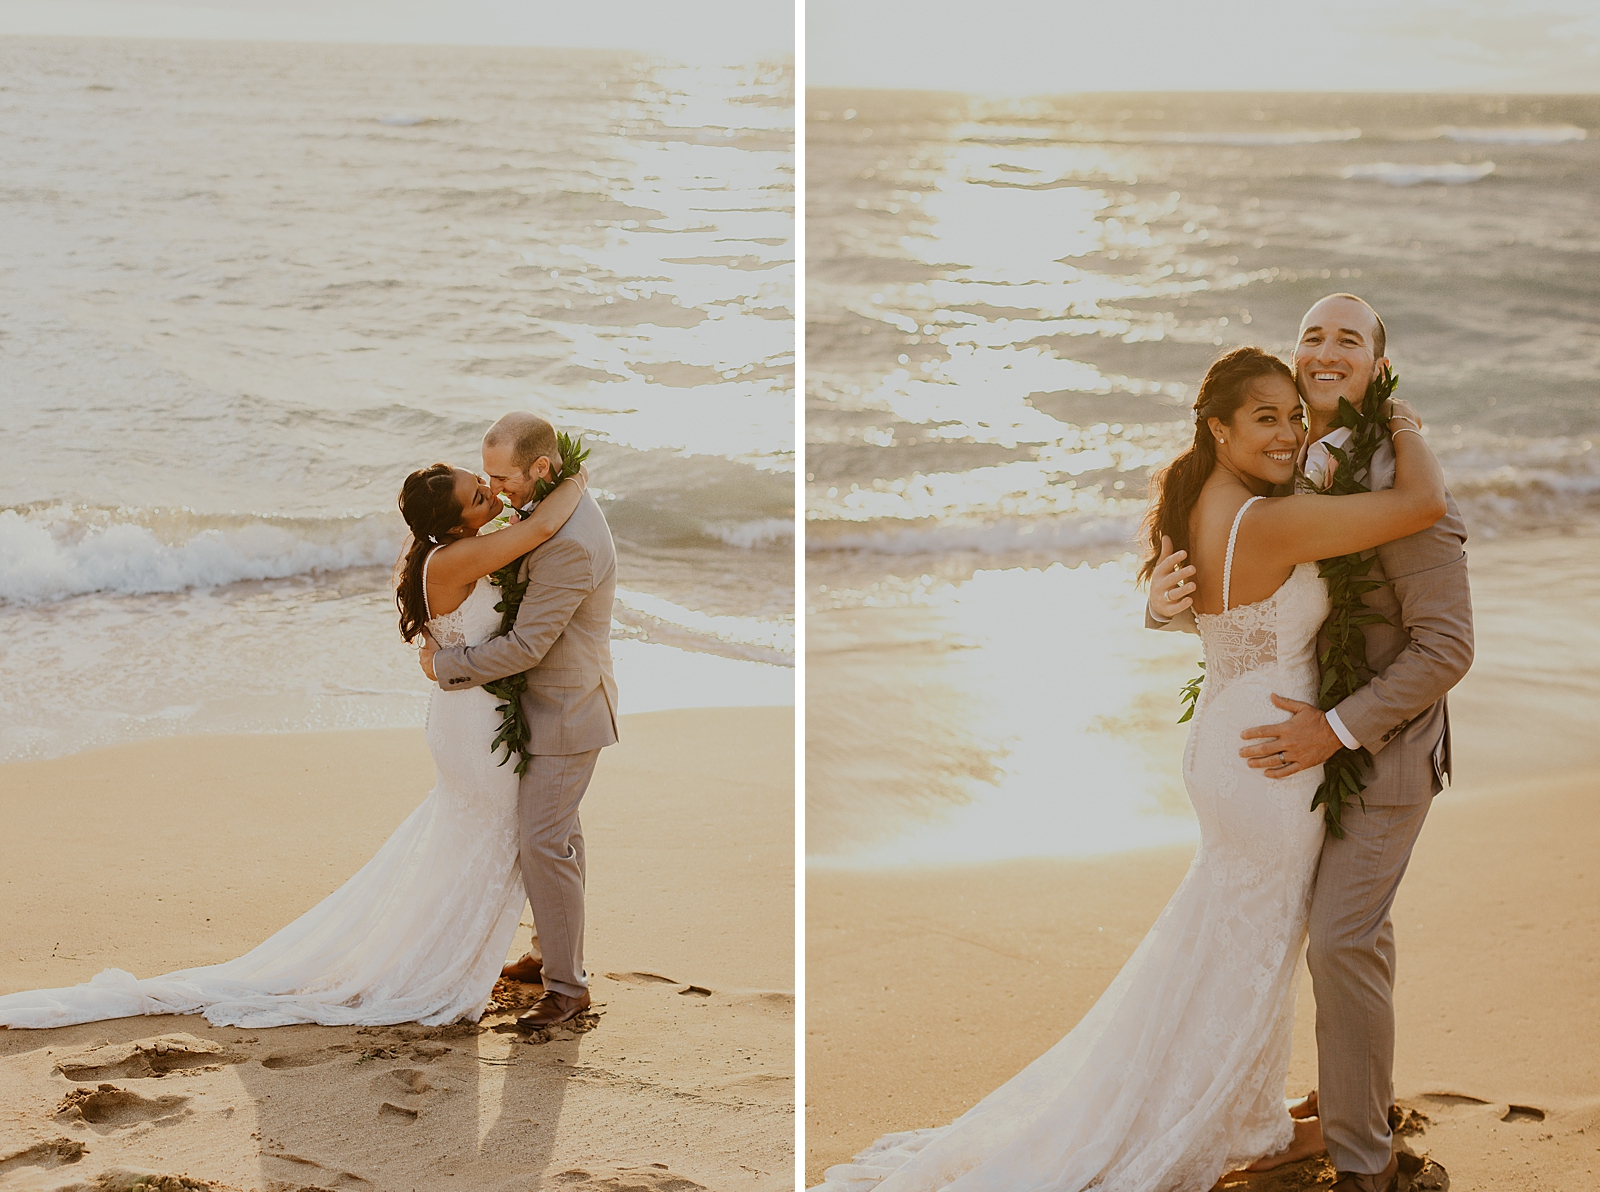 Bride and Groom holding each other close in front of the ocean waves coming in on the beach